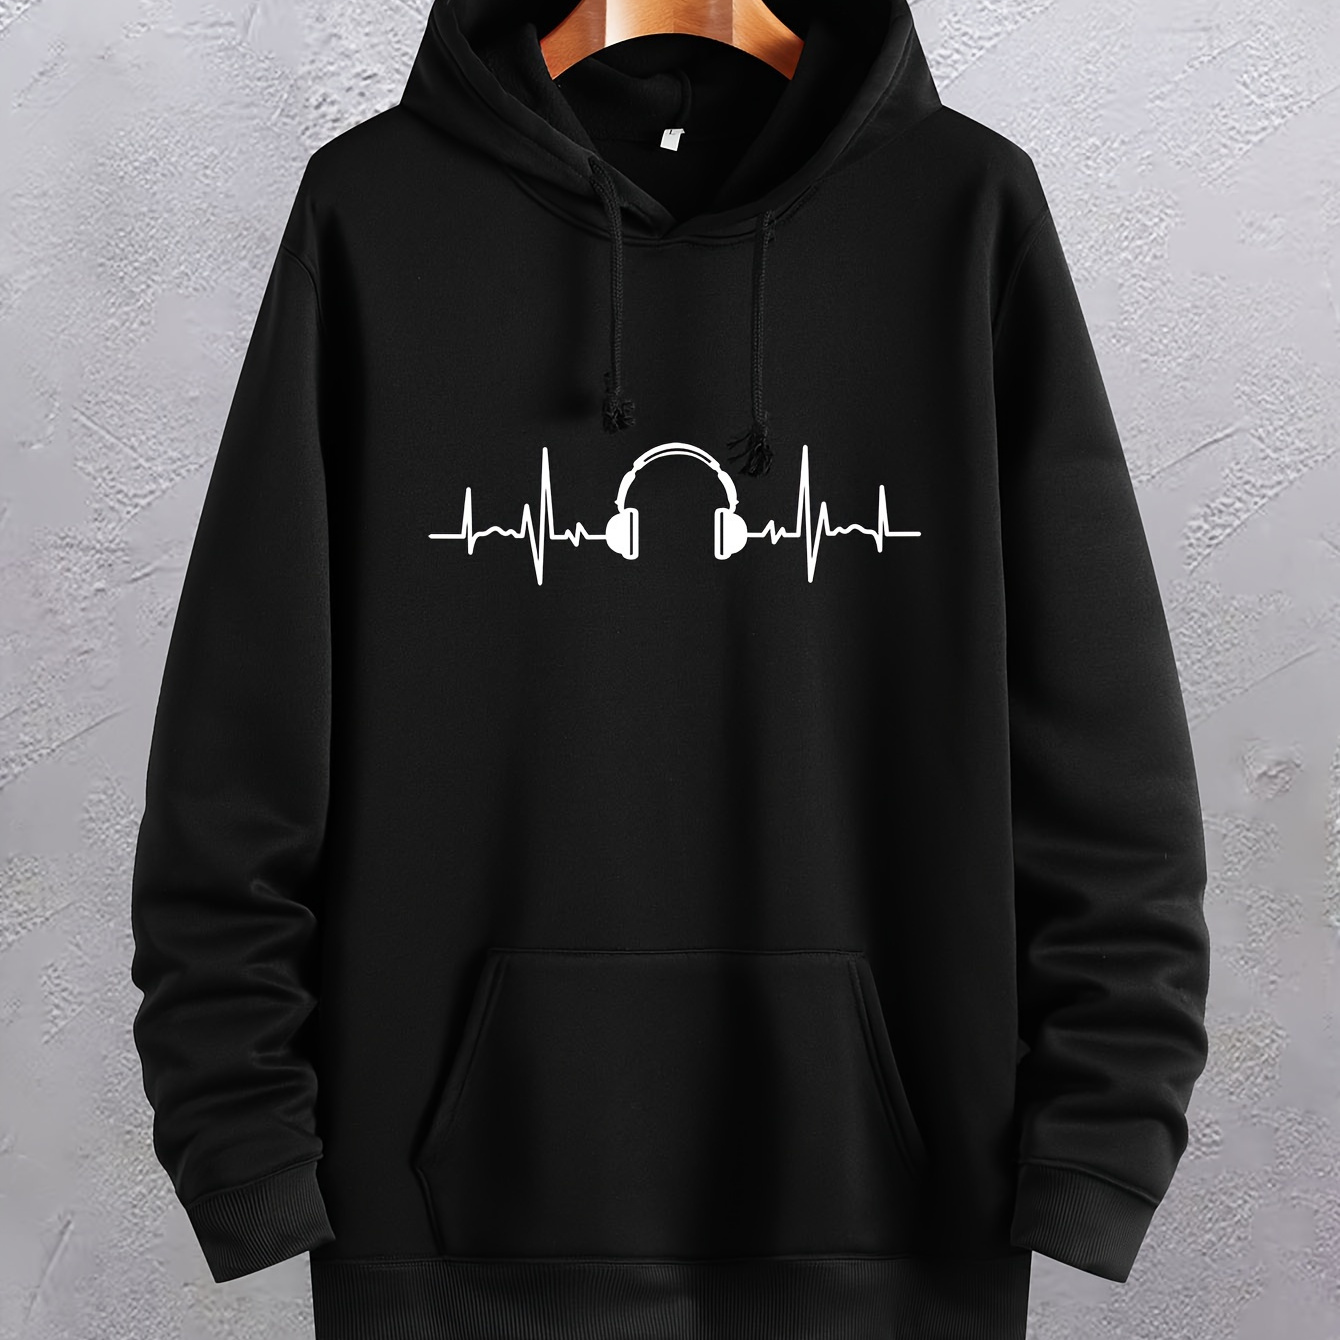 

Headphone Print Hoodies For Men, Graphic Hoodie With Kangaroo Pocket, Comfy Loose Trendy Hooded Pullover, Mens Clothing For Autumn Winter